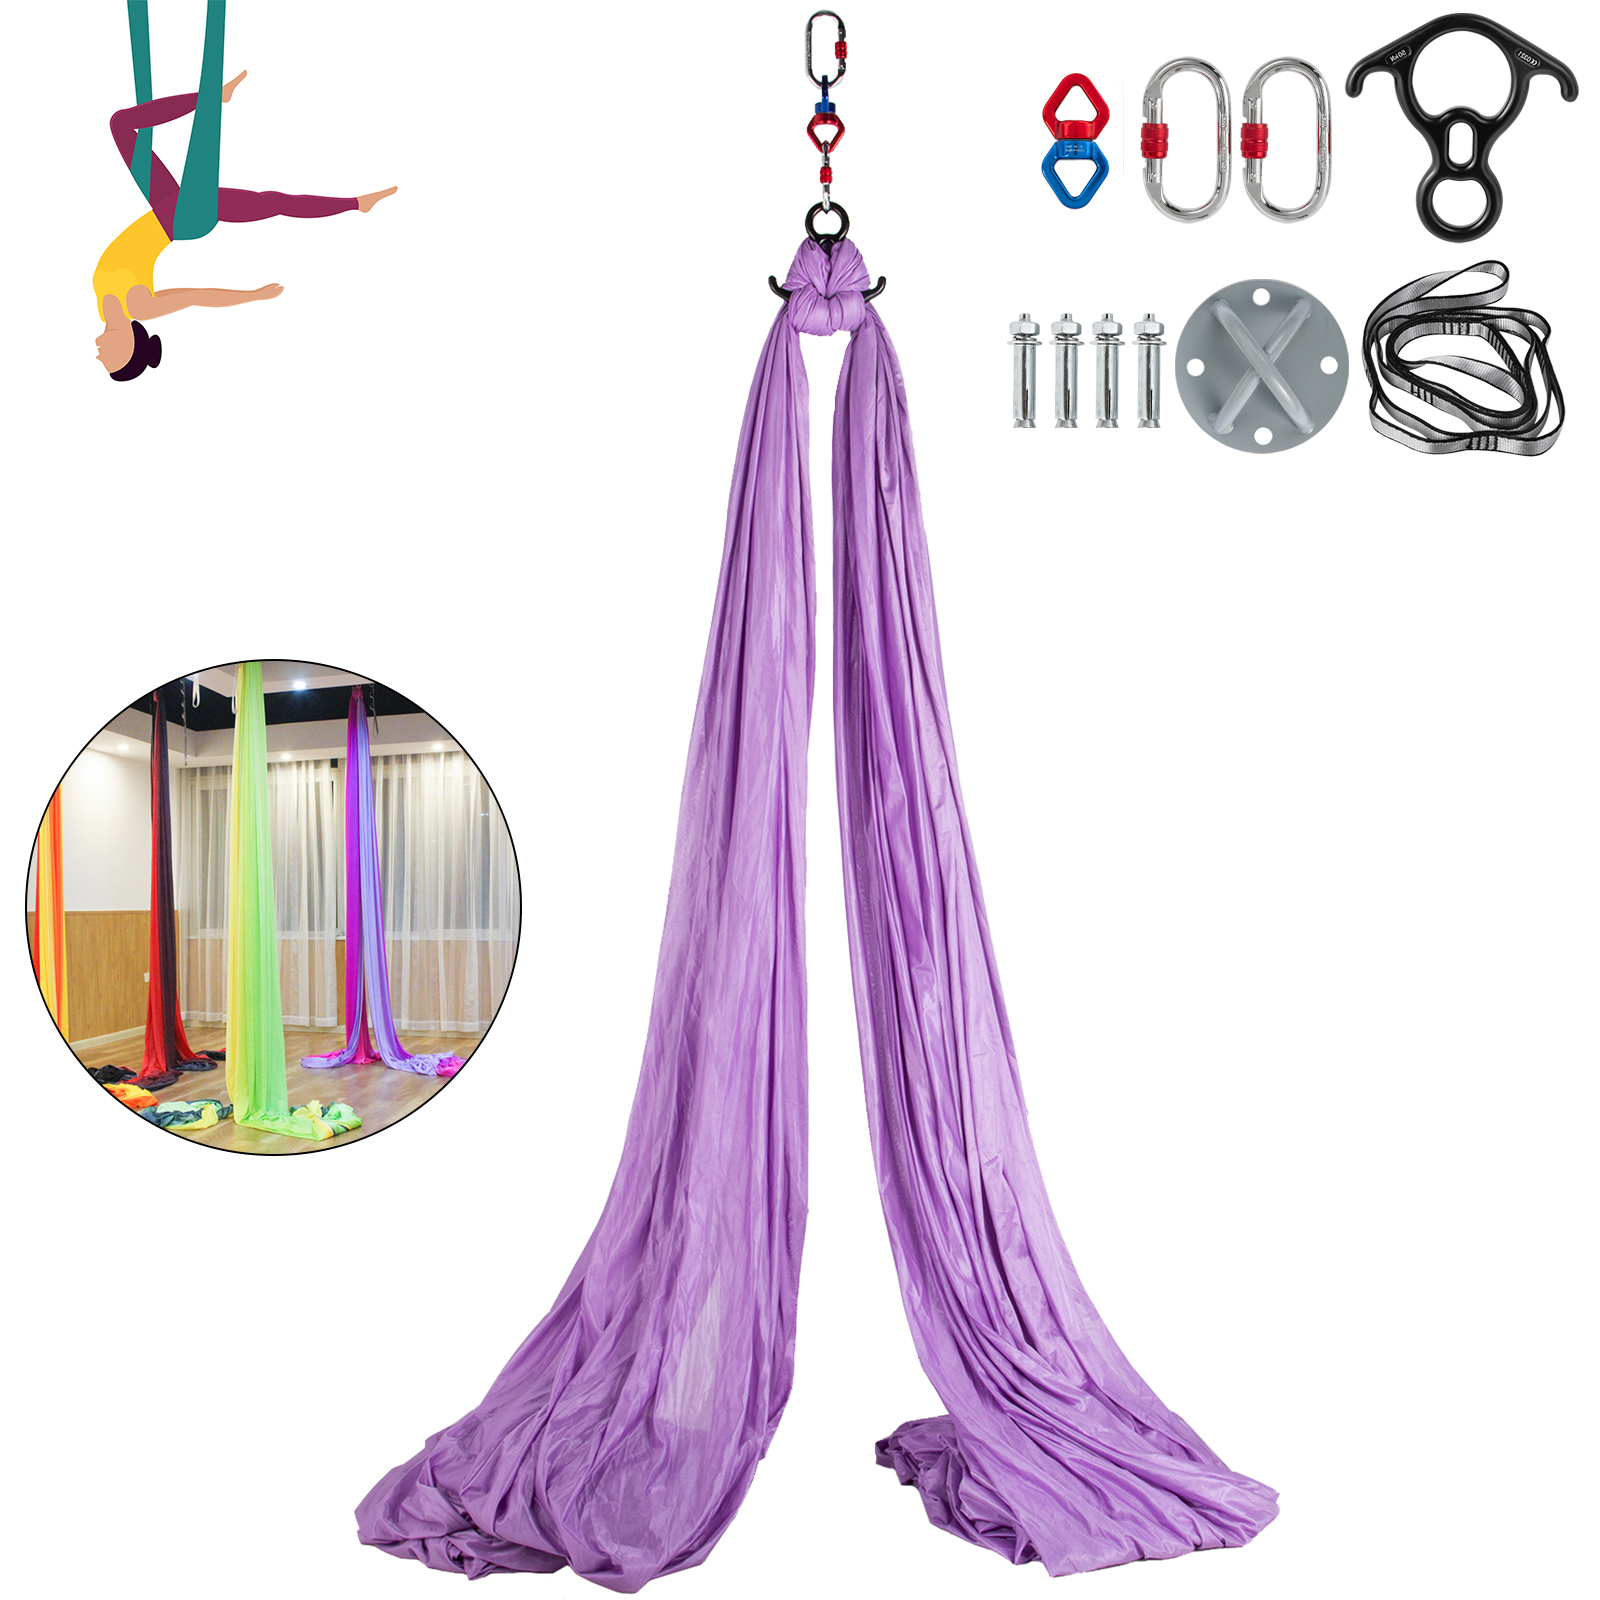 VEVOR VEVOR Aerial Yoga Hammock Kit,11YD9.2FT Yoga Swing Set,Antigravity  Ceiling Hanging Yoga Sling with Carabiners Daisy Chain, Inversion Swing for  Home Outdoor Aerial Dance, Lavender